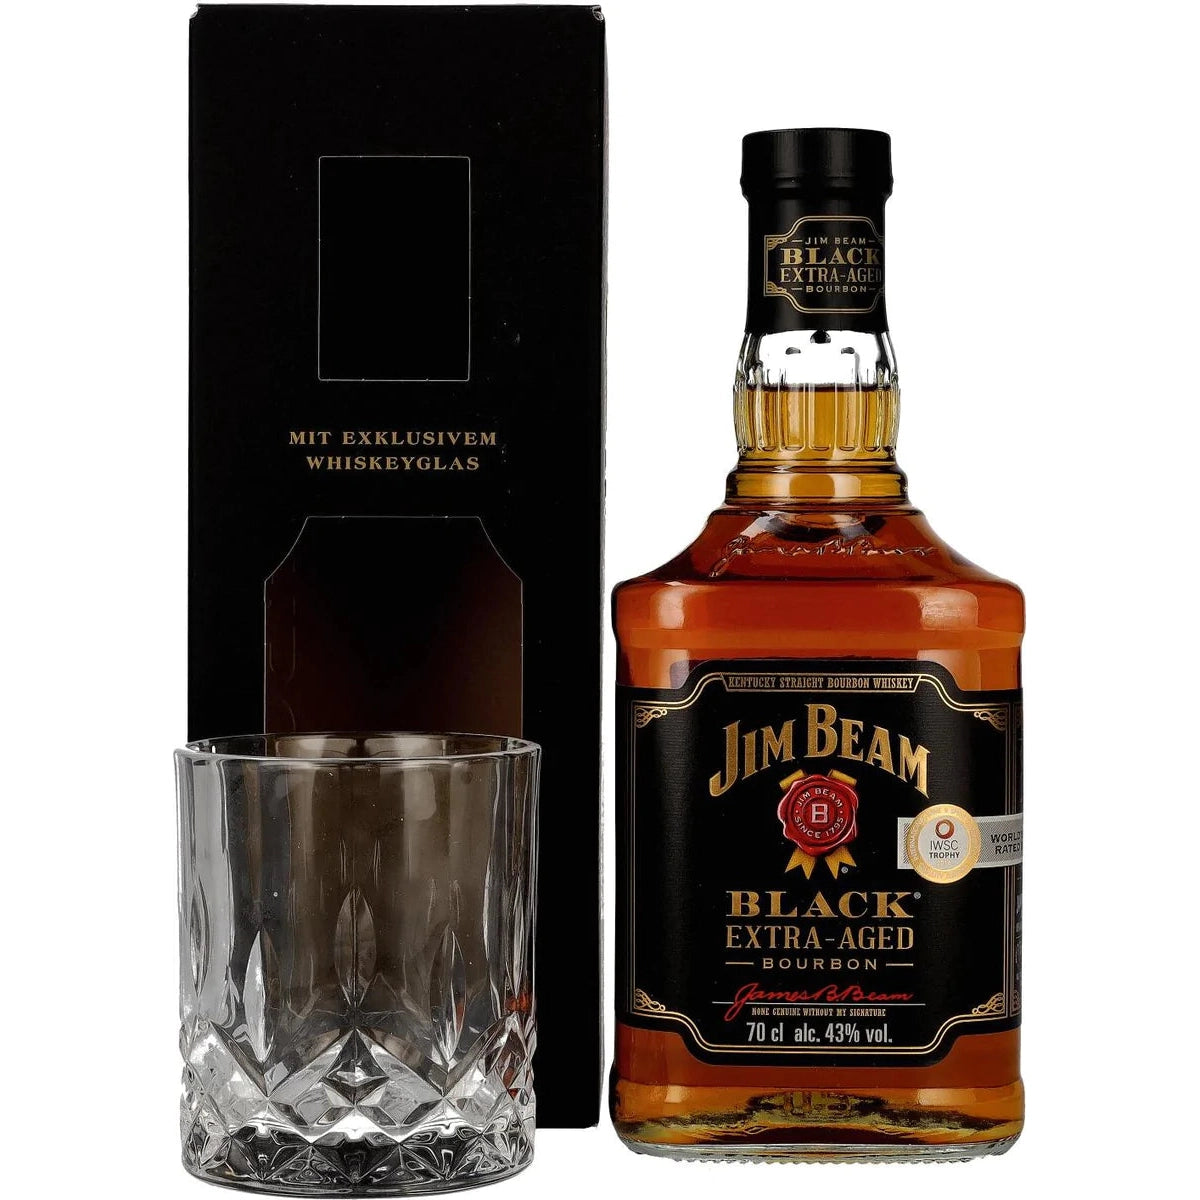 Jim Beam BLACK 43% Extra-Aged Vol. Giftbox with 0,7l Bourbon in glass